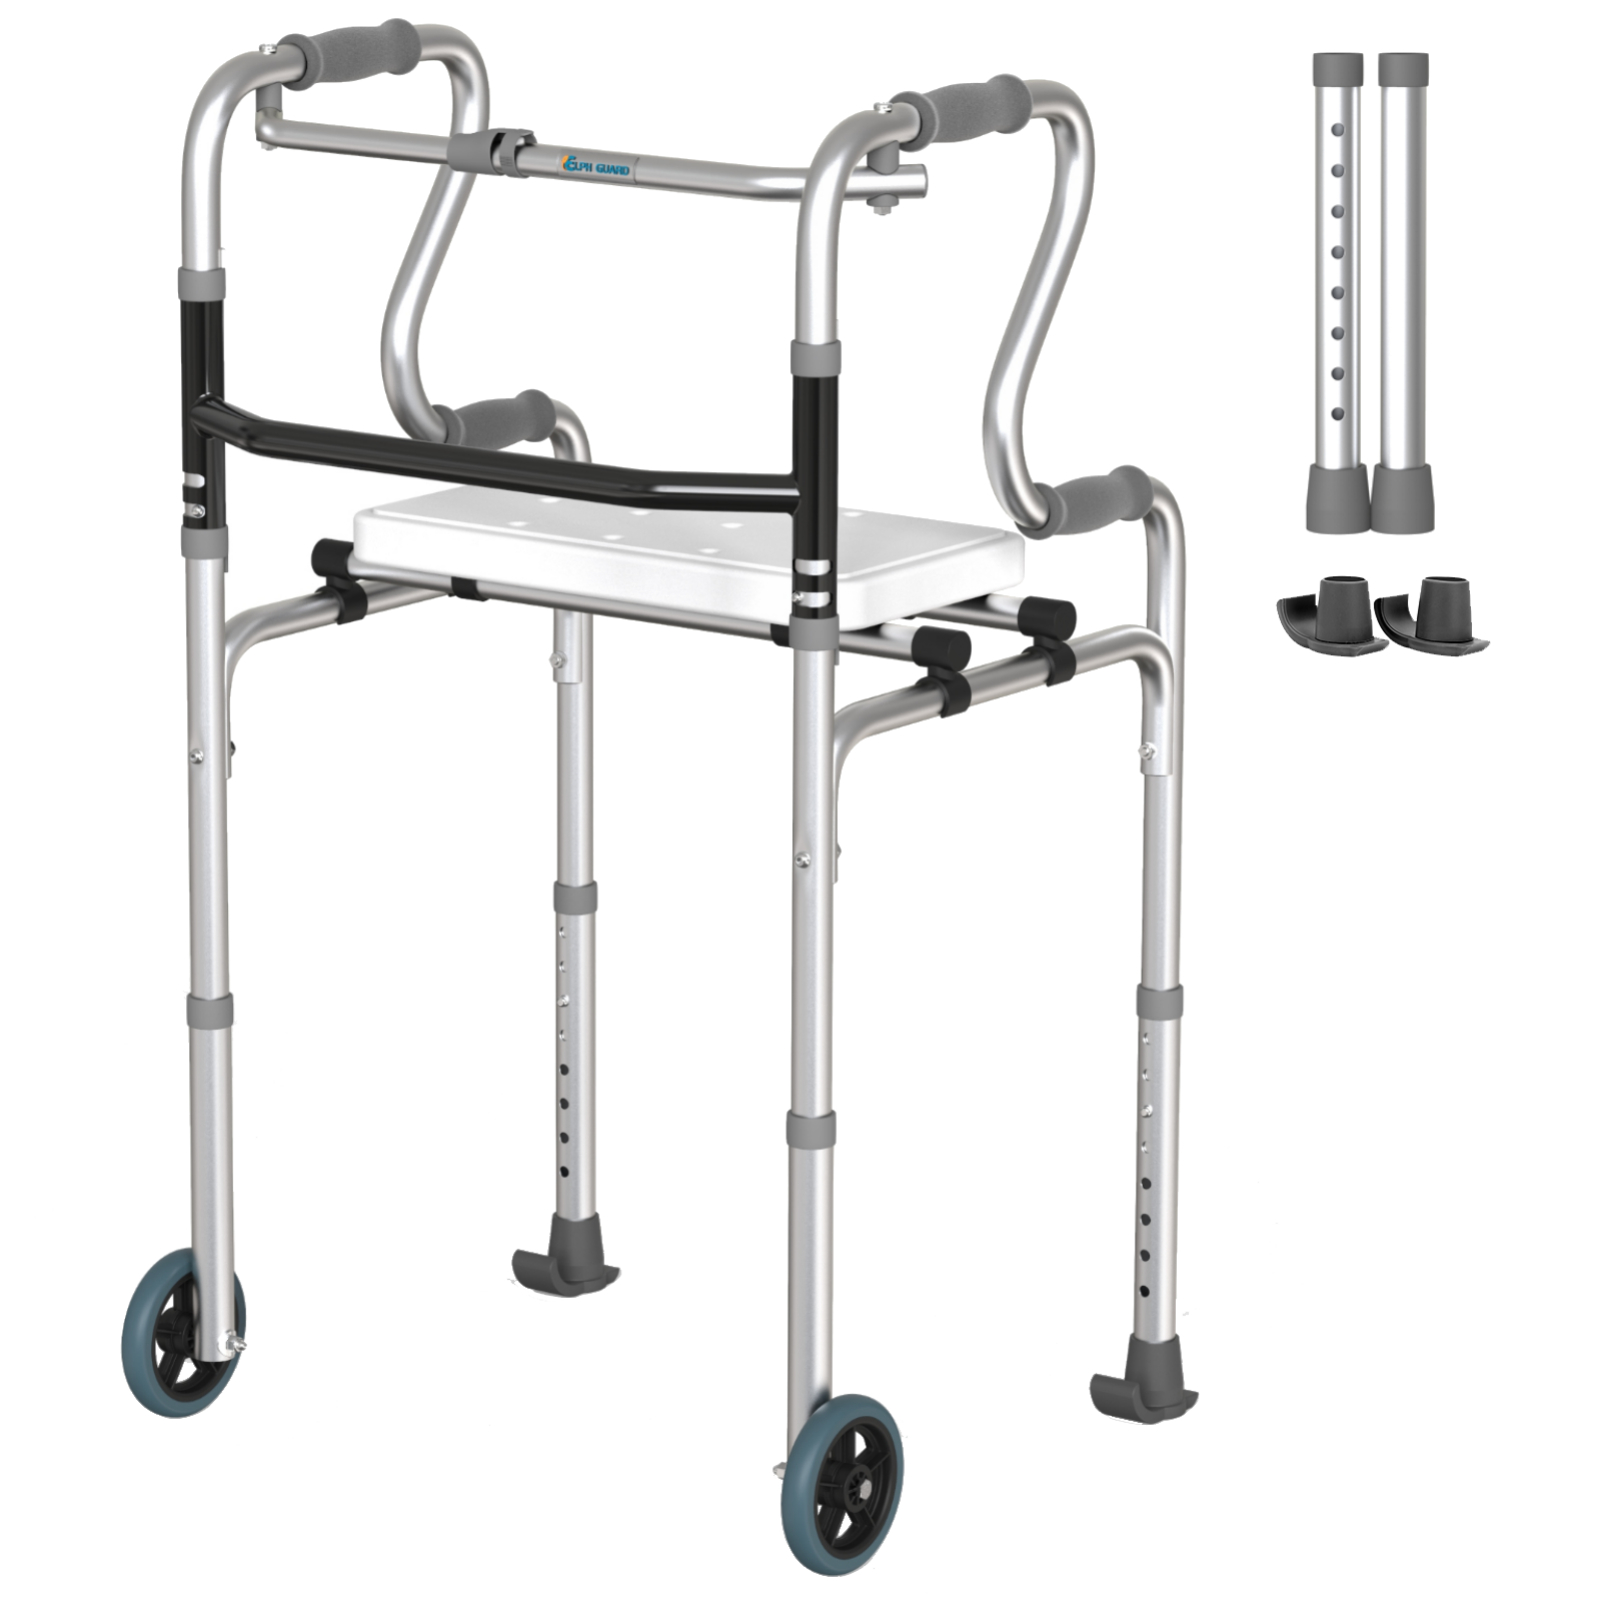 ELPH GUARD Folding Walker with Wheels Walkers for Seniors with Seat Front Wheel Walker 8 Height Adjustable Lightweight Shower Chair Bath Seat Supprot Up to 350lbs